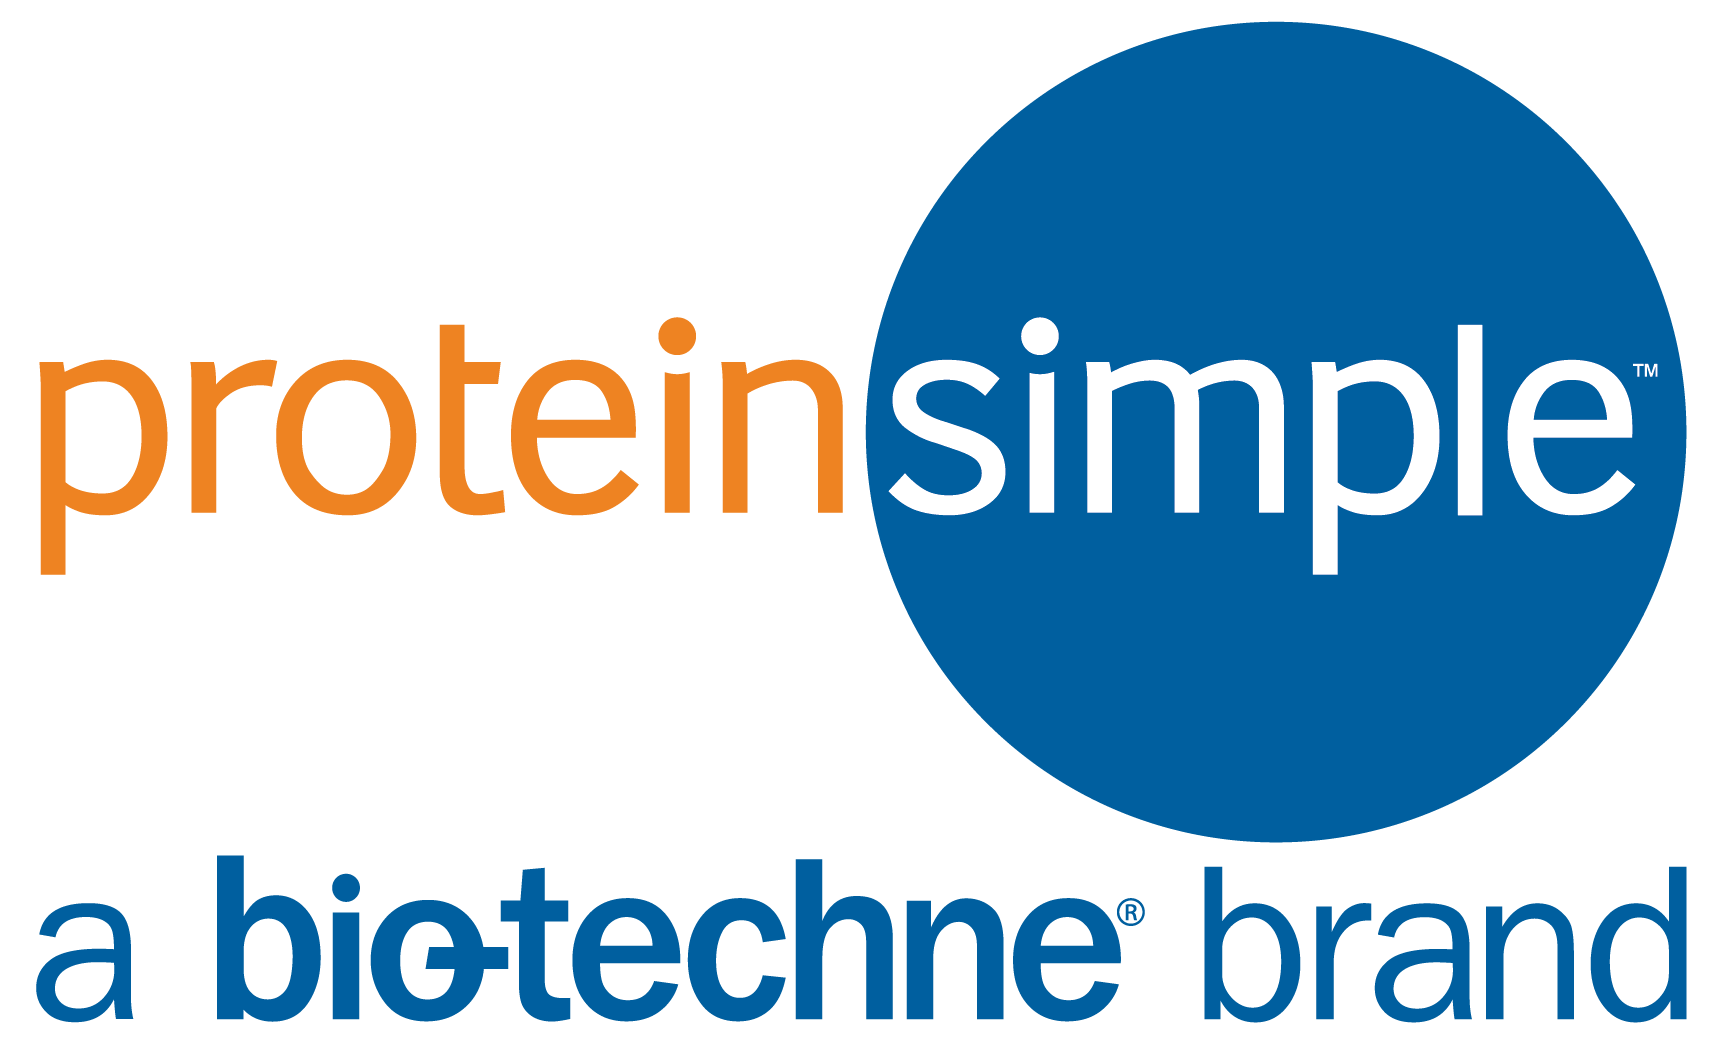 https://www.proteinsimple.com/cell-and-gene-therapy.html?utm_source=cgtinsights&utm_medium=webinar&utm_campaign=12_01_2020_aav_webinar